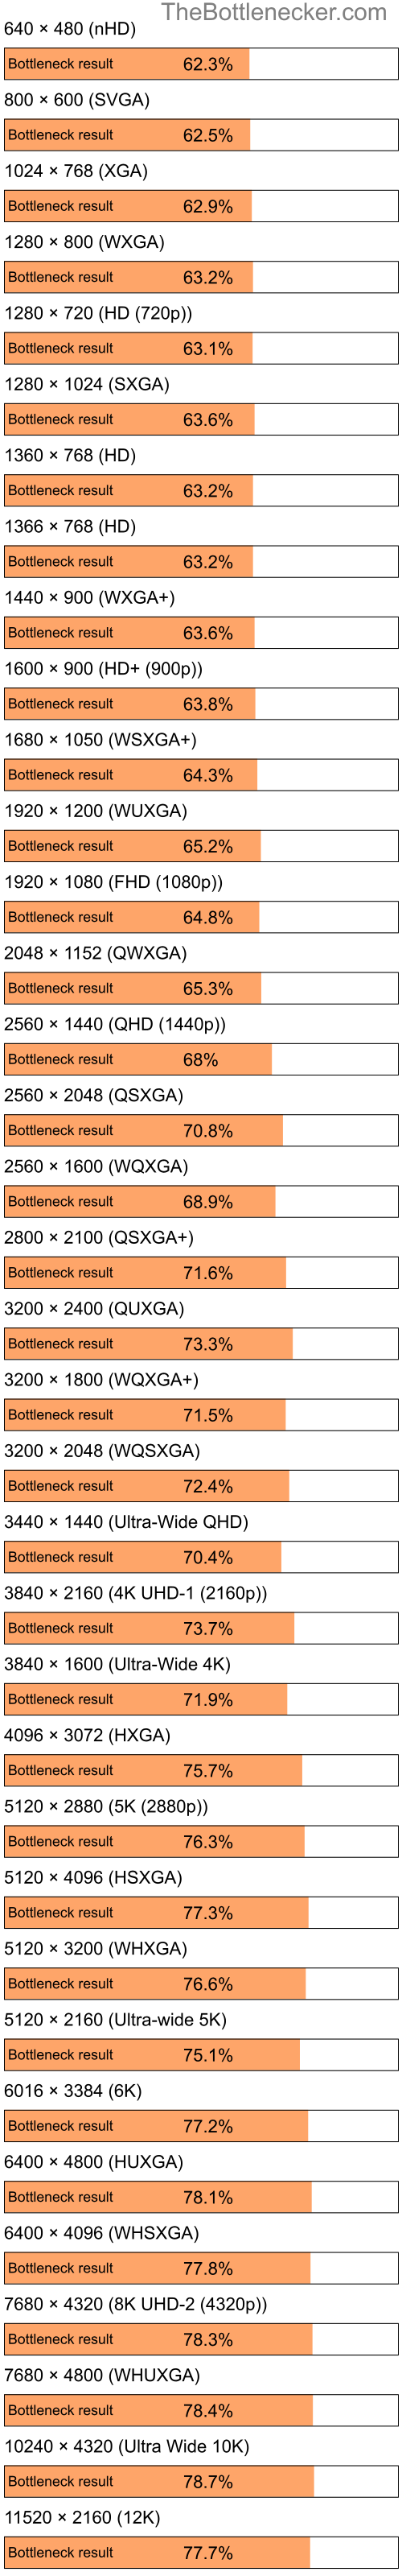 Bottleneck results by resolution for Intel Pentium 4 and NVIDIA Quadro NVS 110M in Processor Intense Tasks